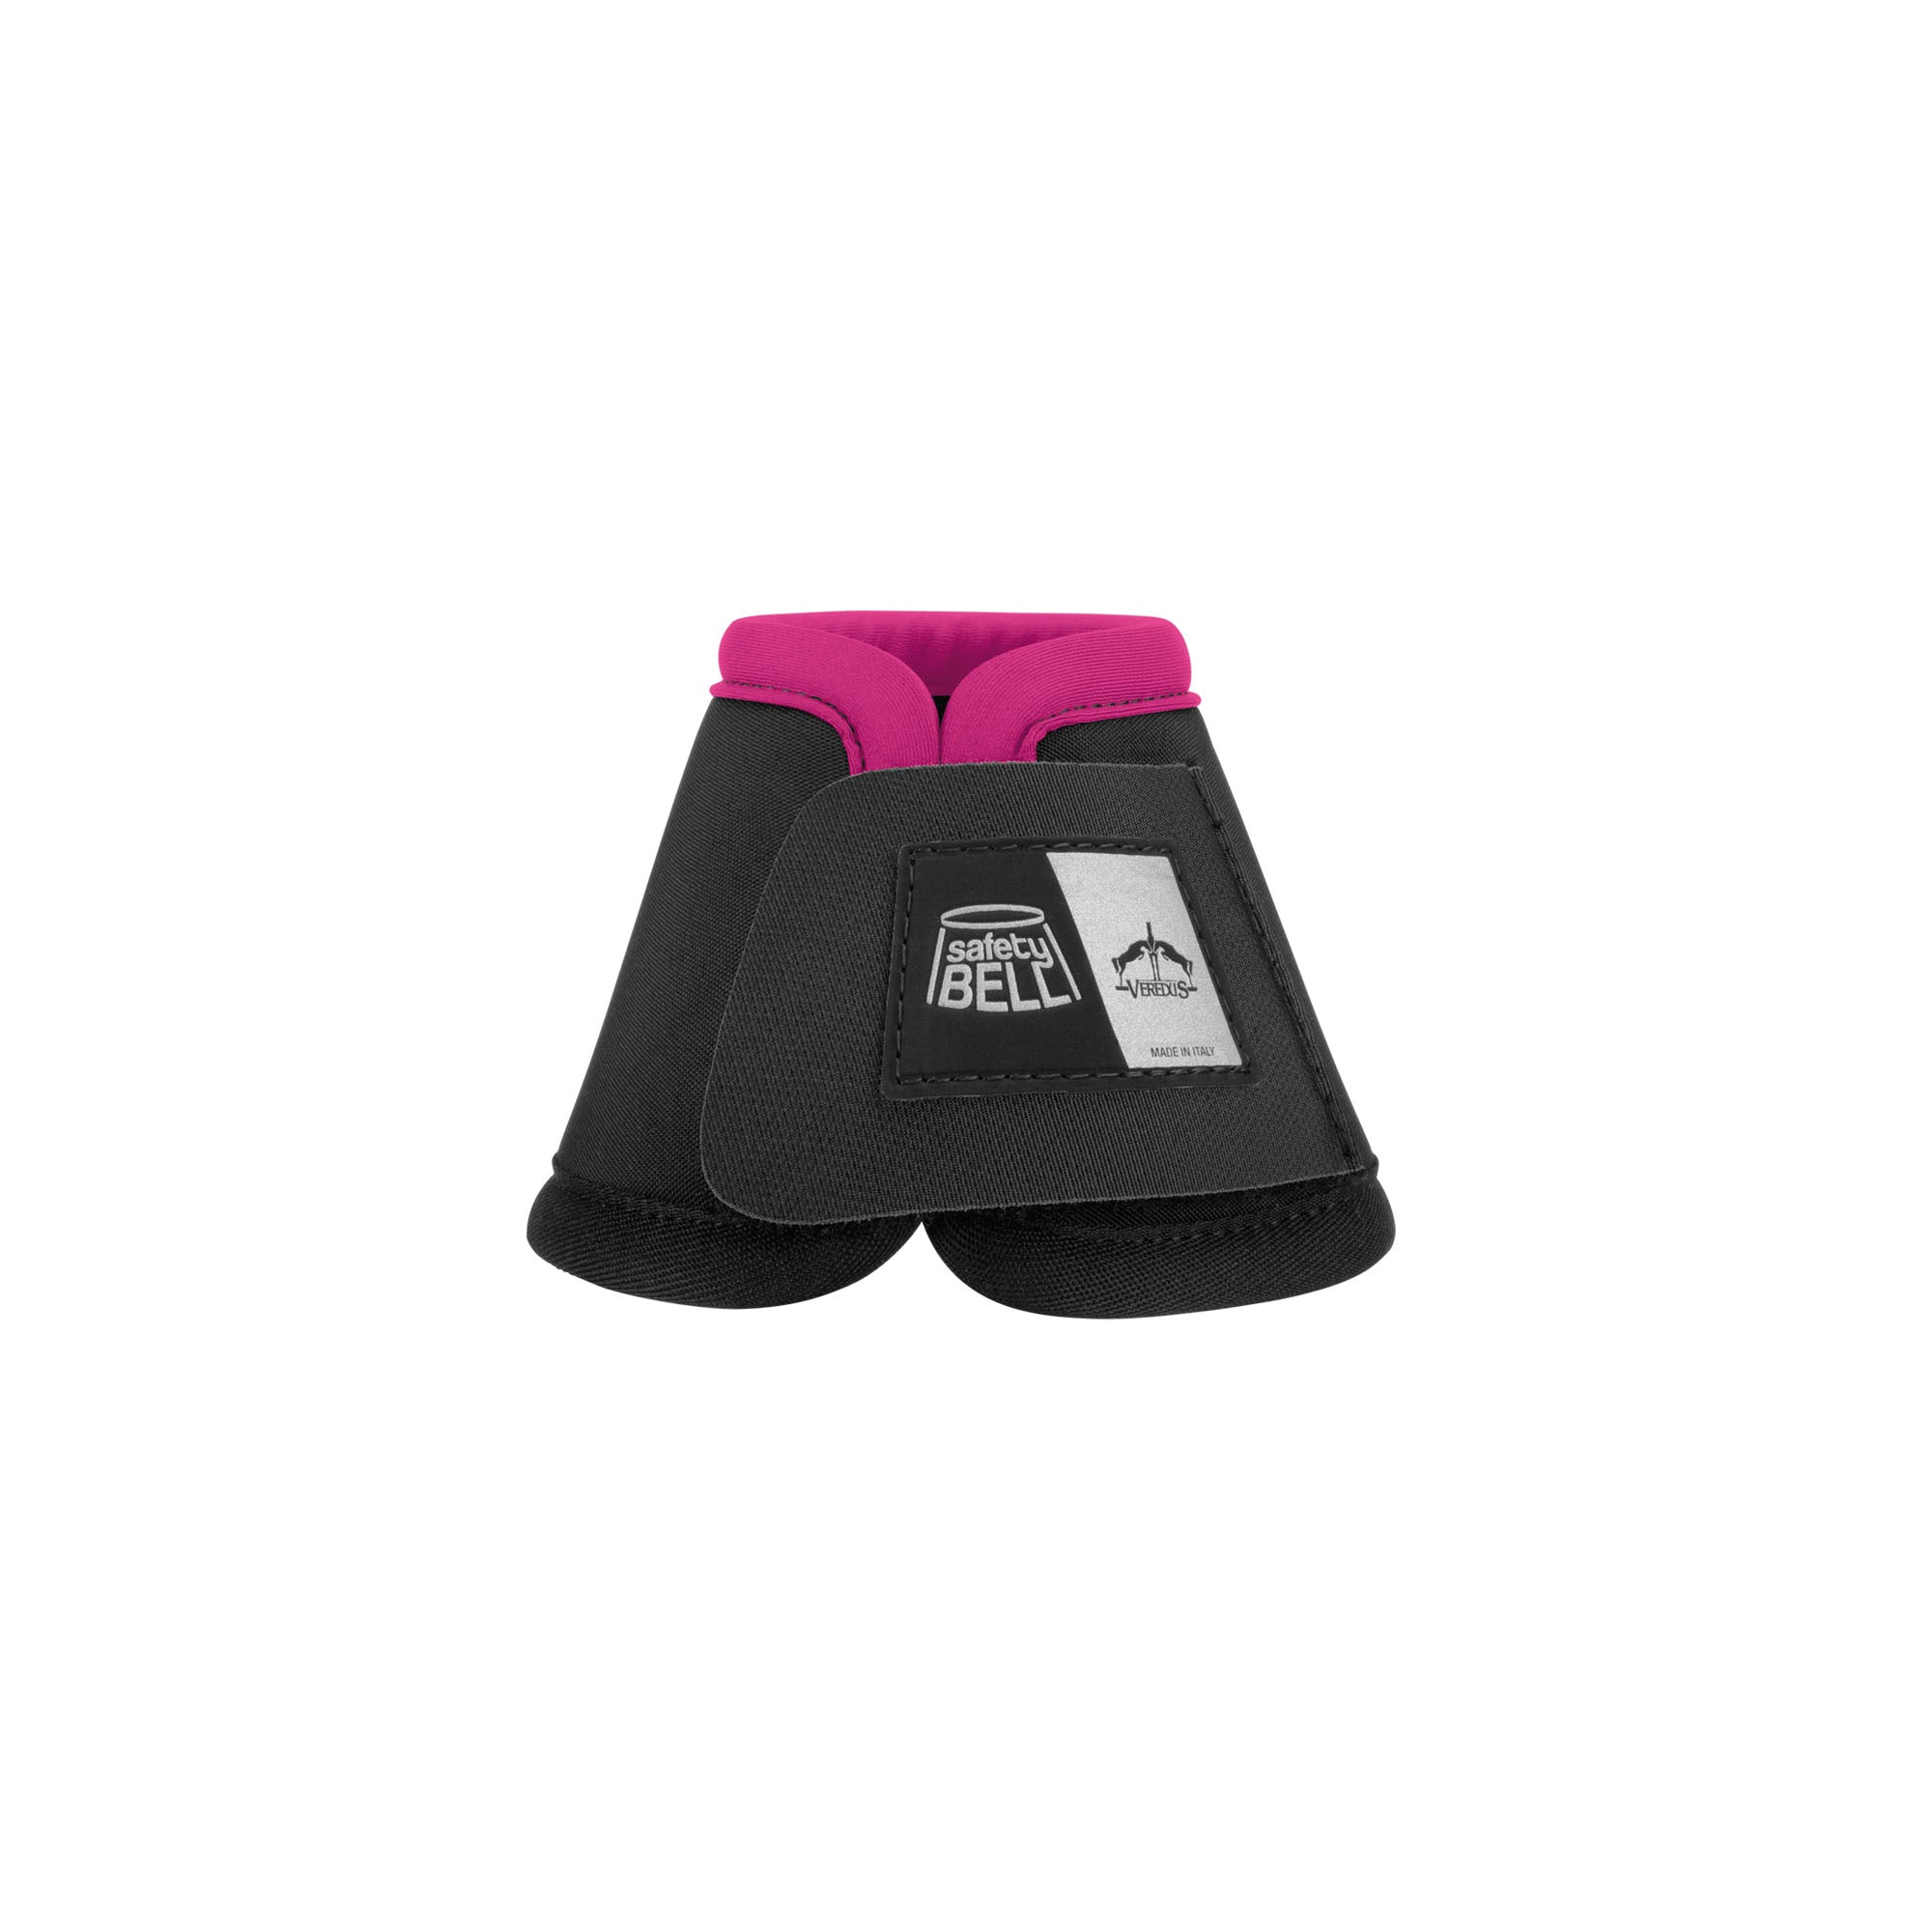 Verdus Light Safety Bell Boot -  Heel Protection -  Overeach - Black/Pink